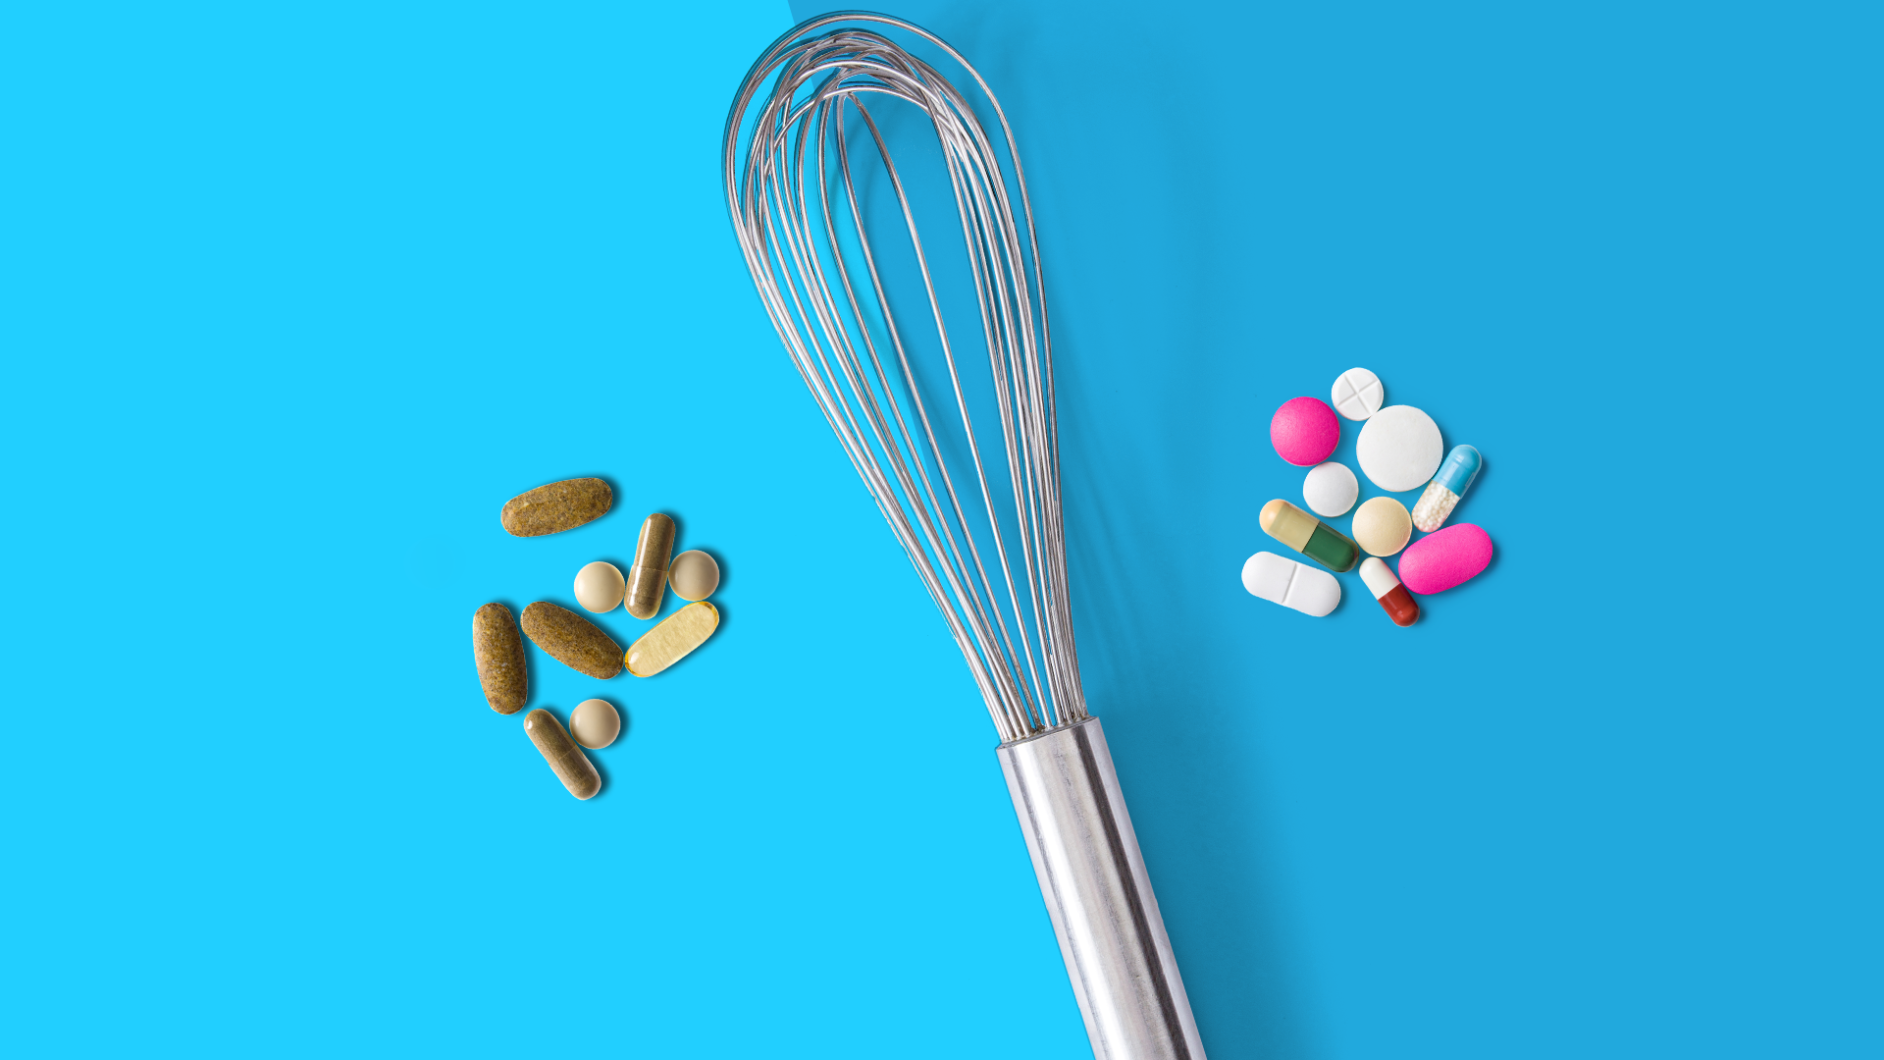 medications and vitamins - can you take medicine and vitamins together